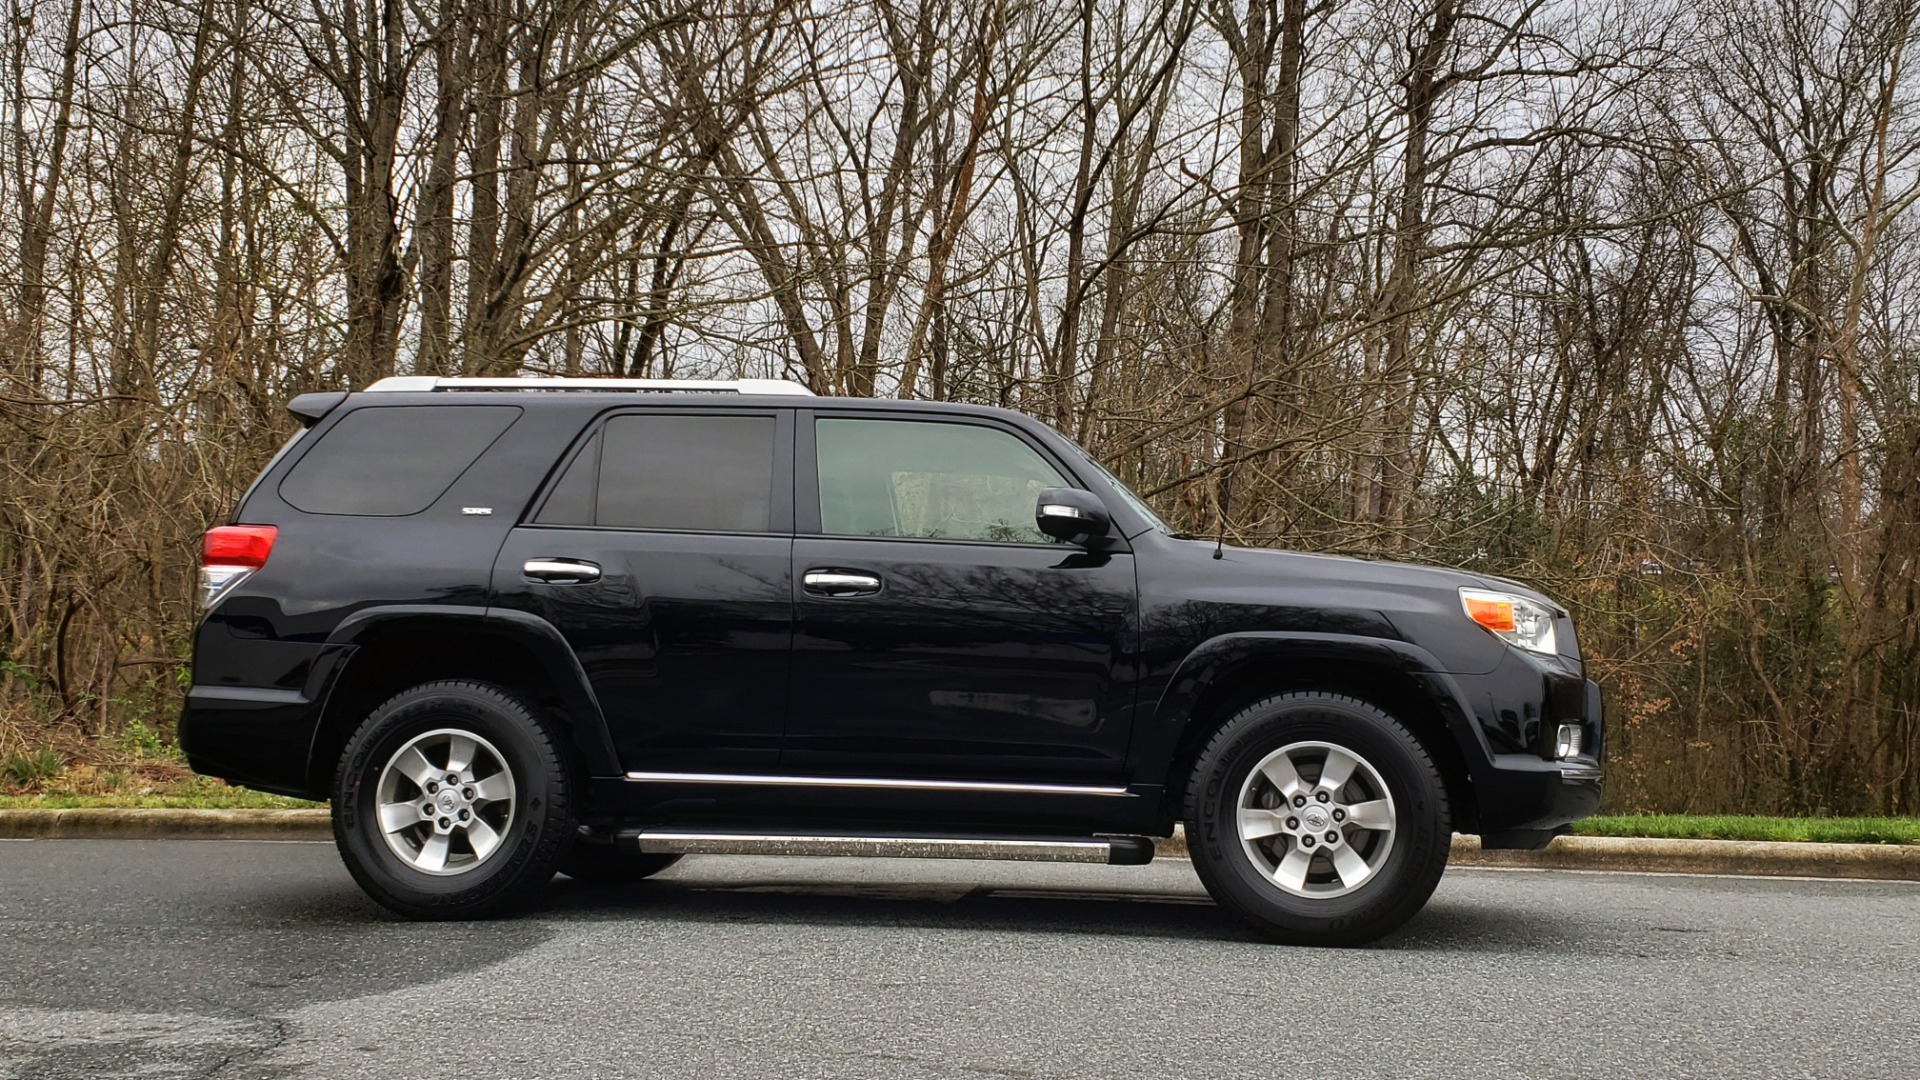 Used 2011 Toyota 4RUNNER SR5 2WD / 5-SPD AUTO / 4.0L V6 / SAT RADIO / PWR STS for sale Sold at Formula Imports in Charlotte NC 28227 5